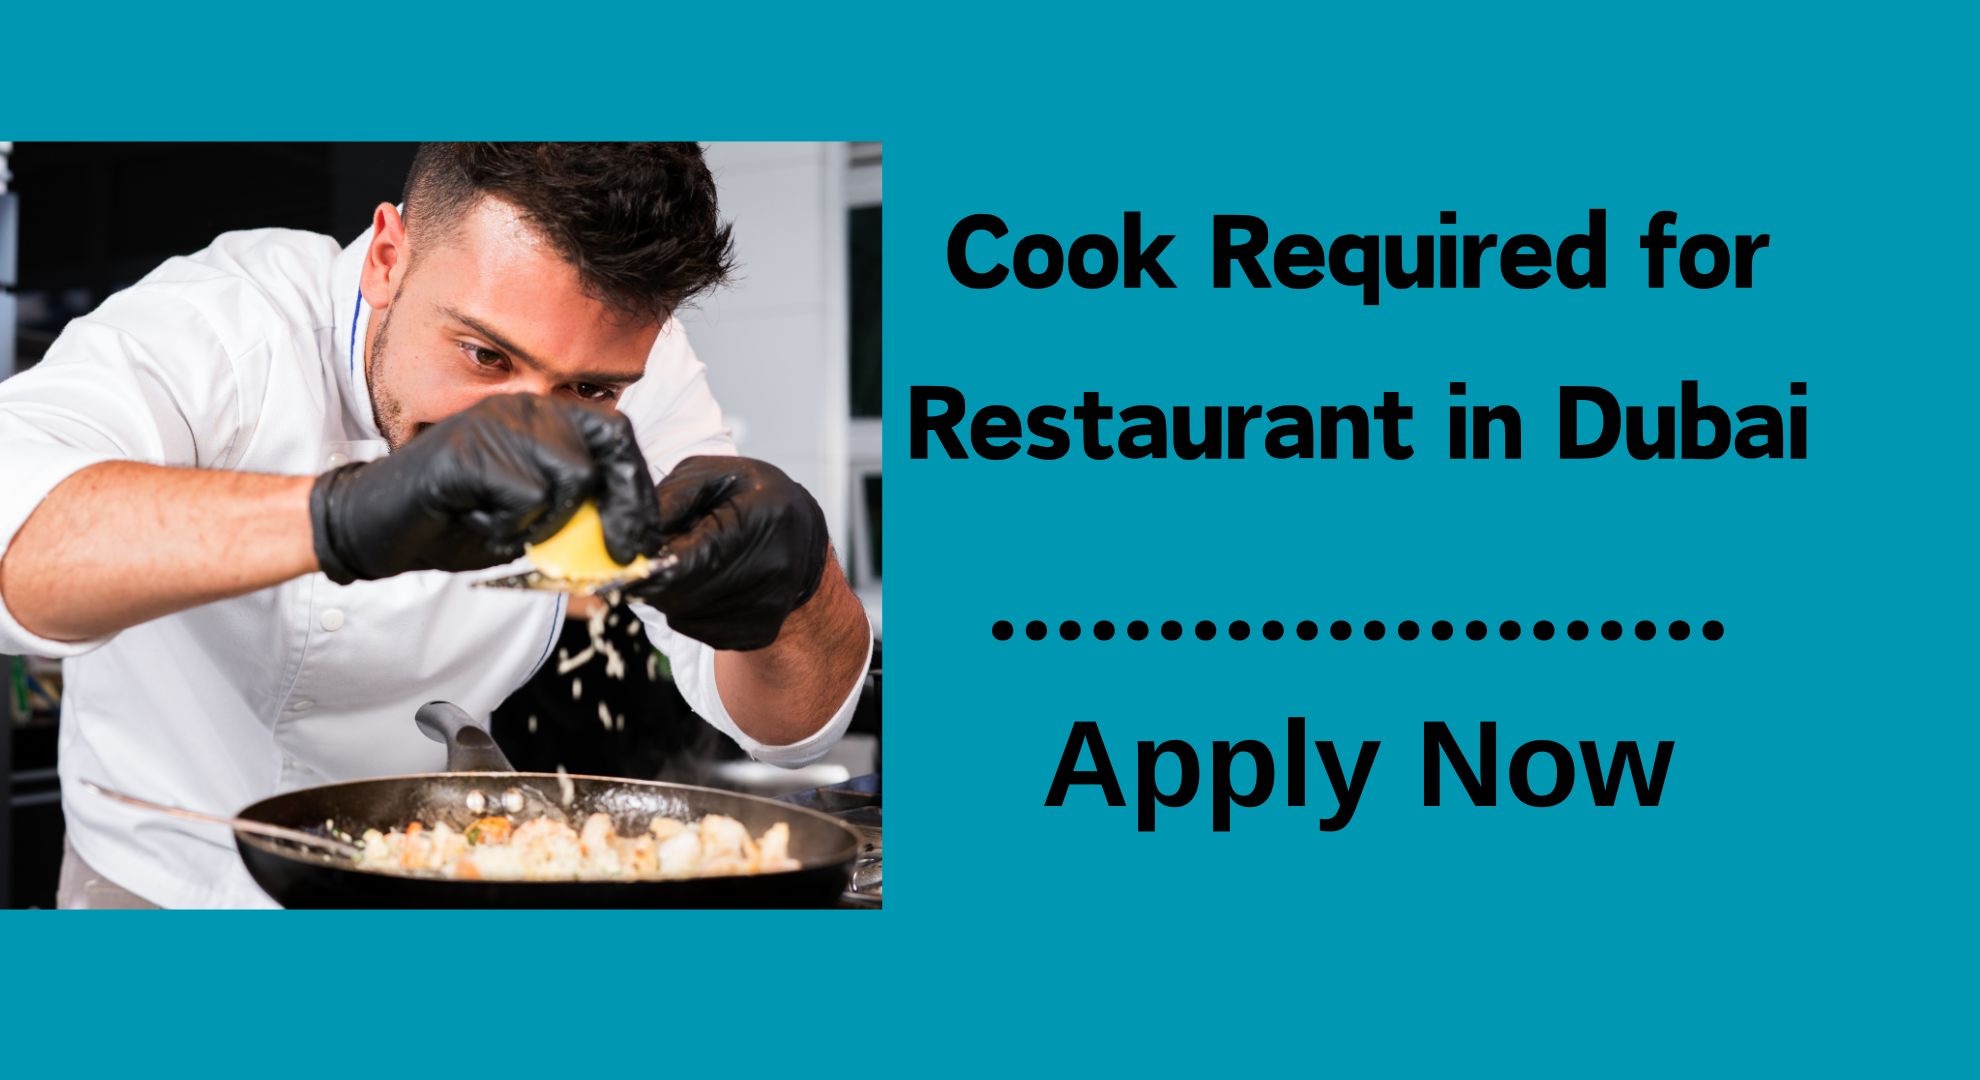 Cook Required for Restaurant in Dubai